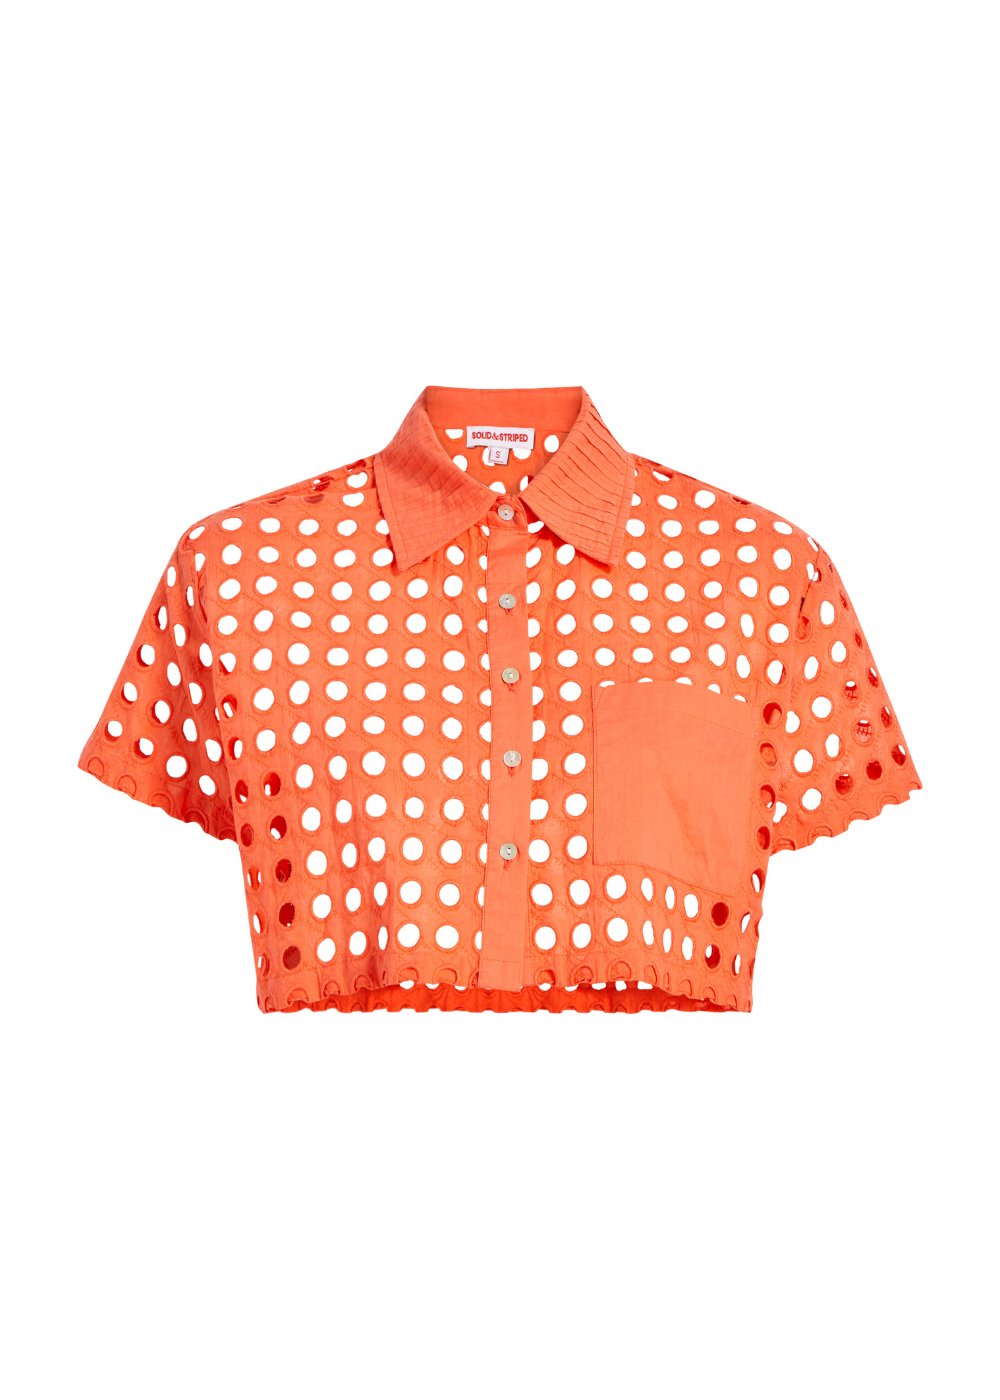 The Eyelet Cropped Cabana Shirt in Hot Coral